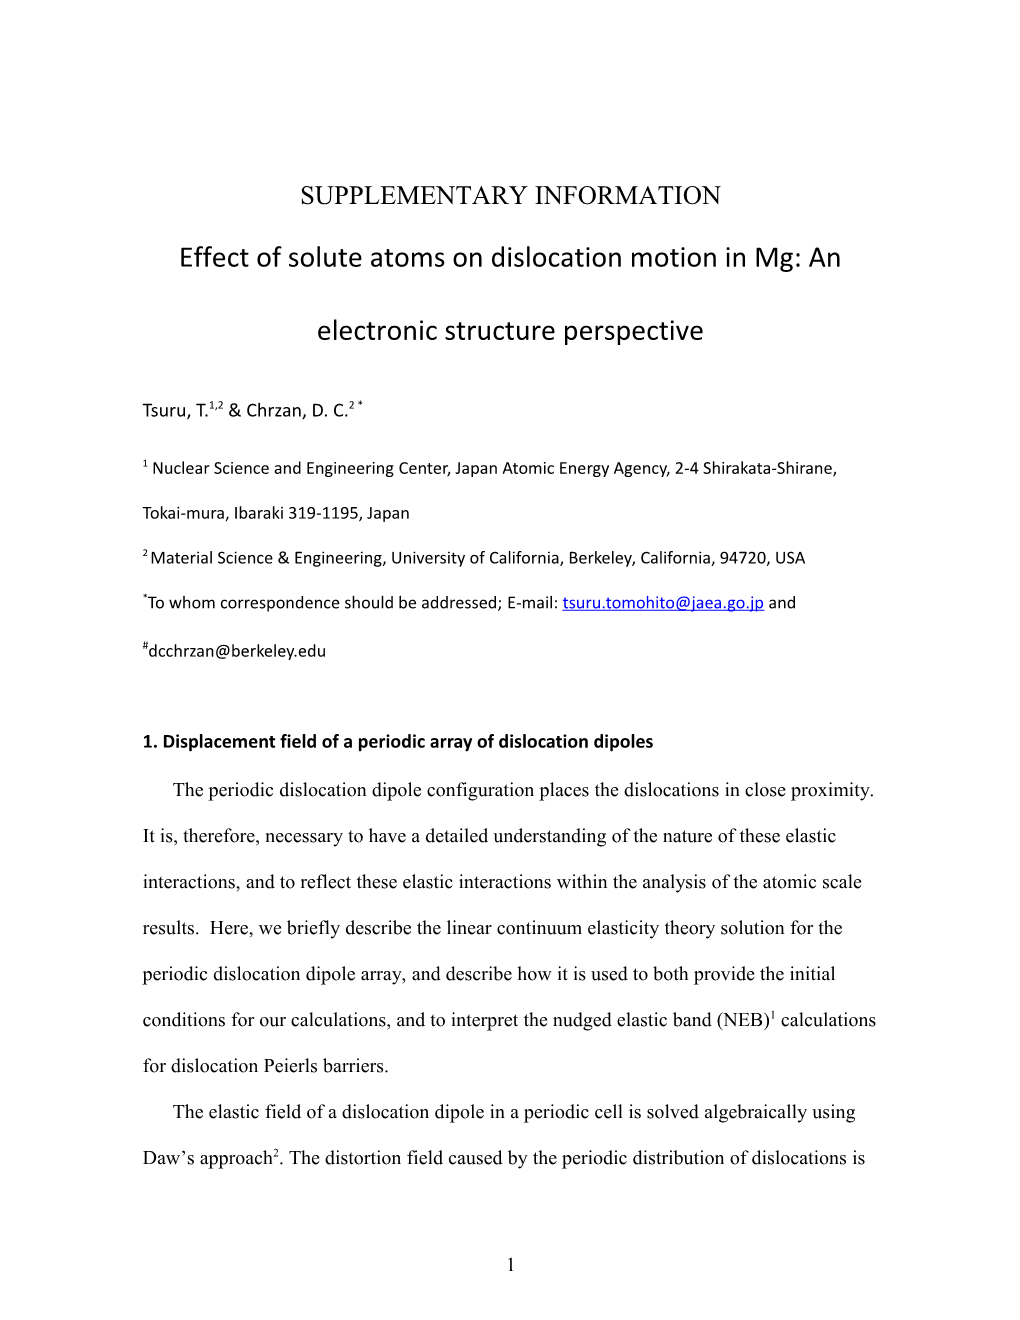 Effect of Solute Atoms on Dislocation Motion in Mg: an Electronic Structure Perspective